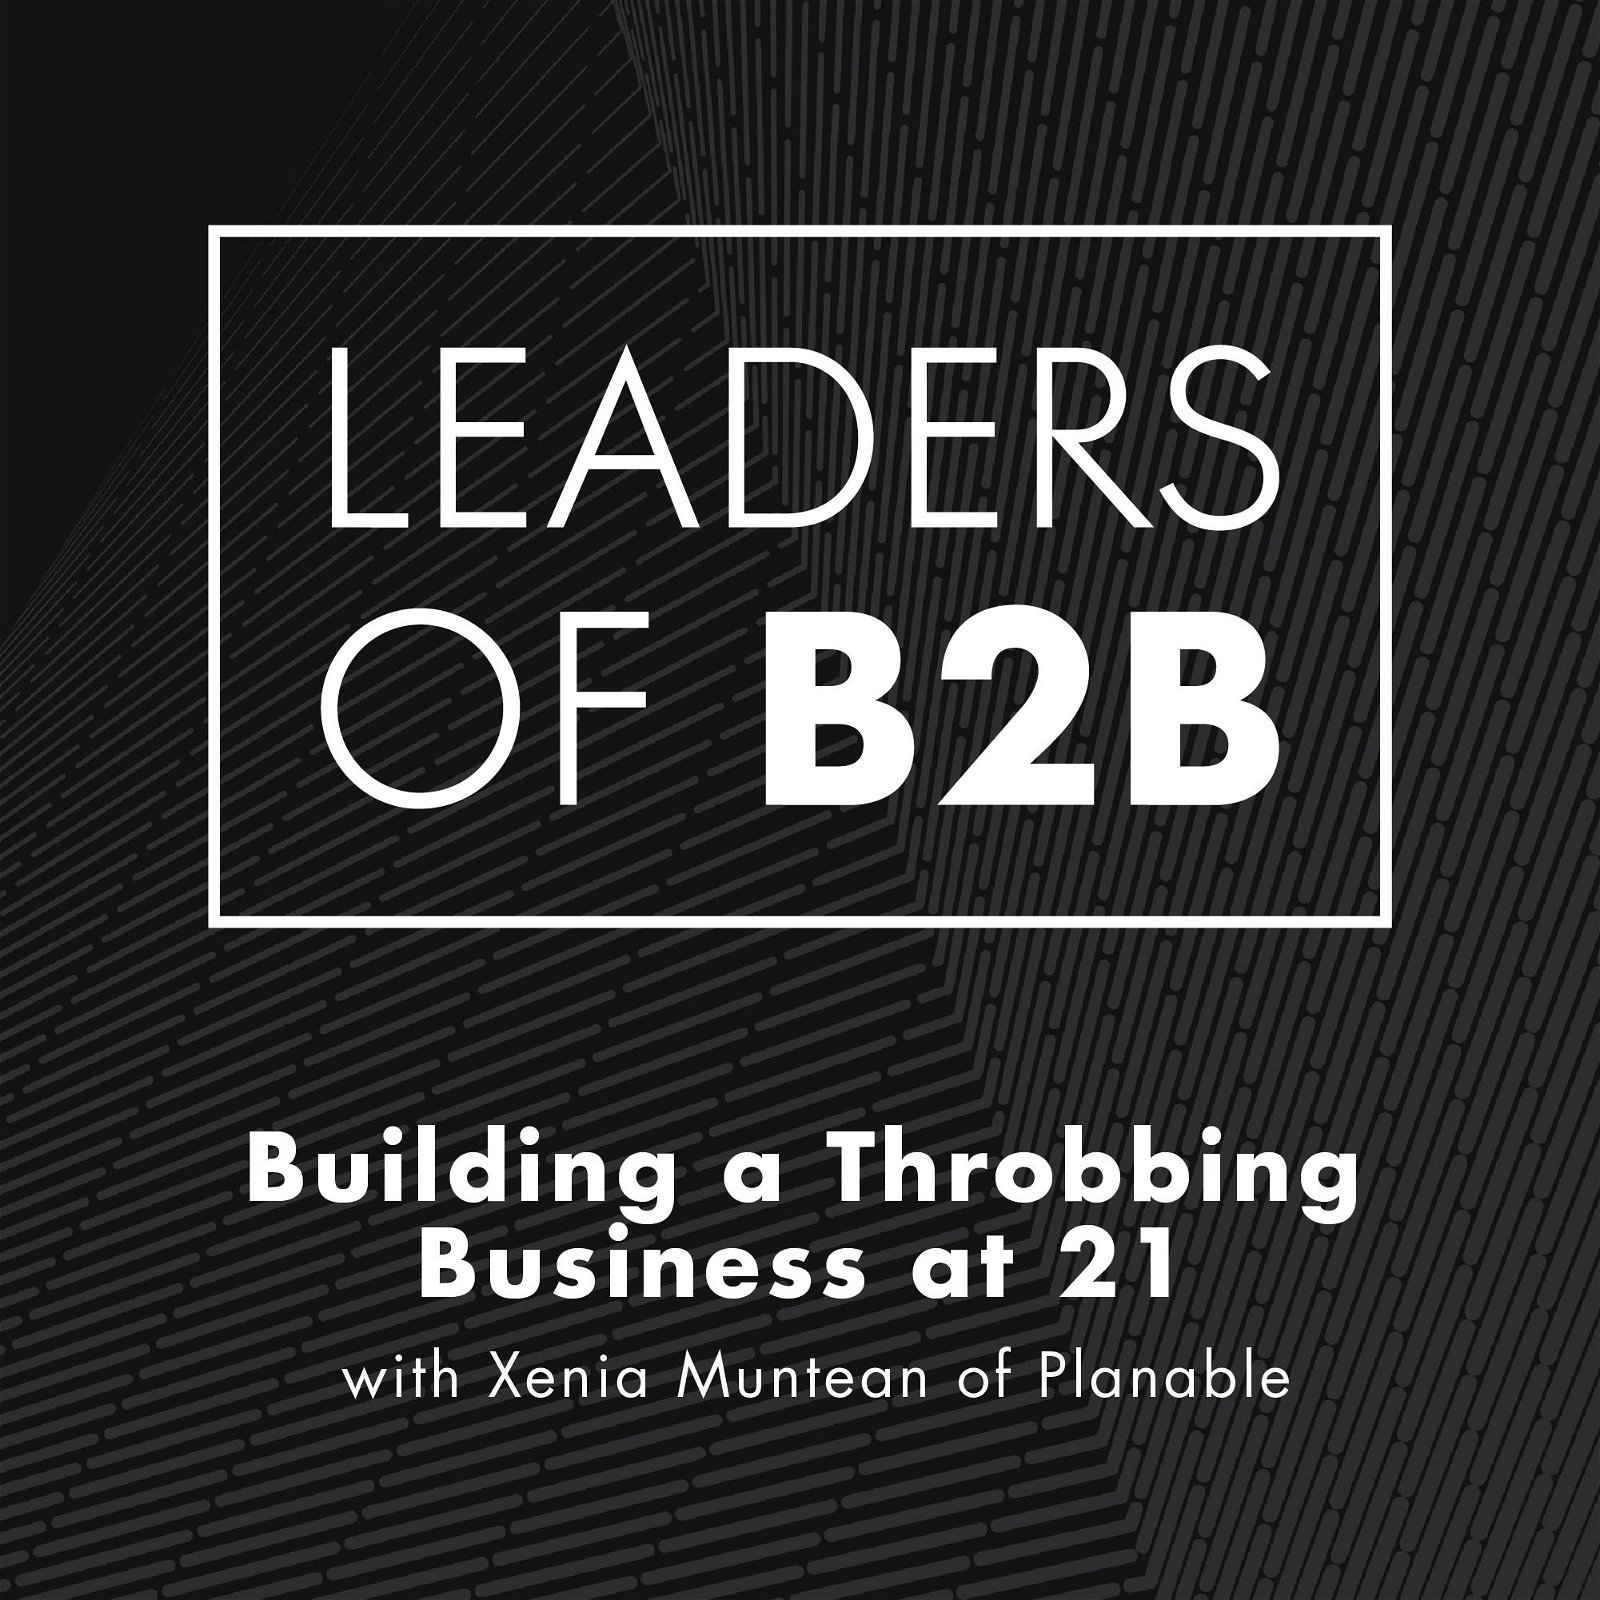 Building a Throbbing Business at 21 with Xenia Muntean of Planable